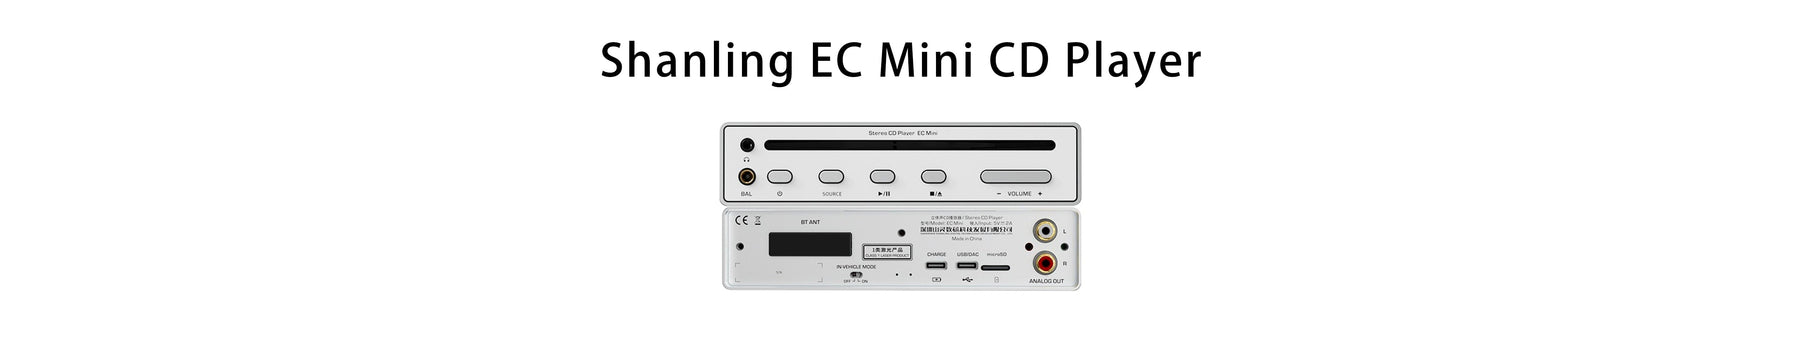 Shanling EC Mini Transportable CD Player With Dual ES9219 DAC Chips